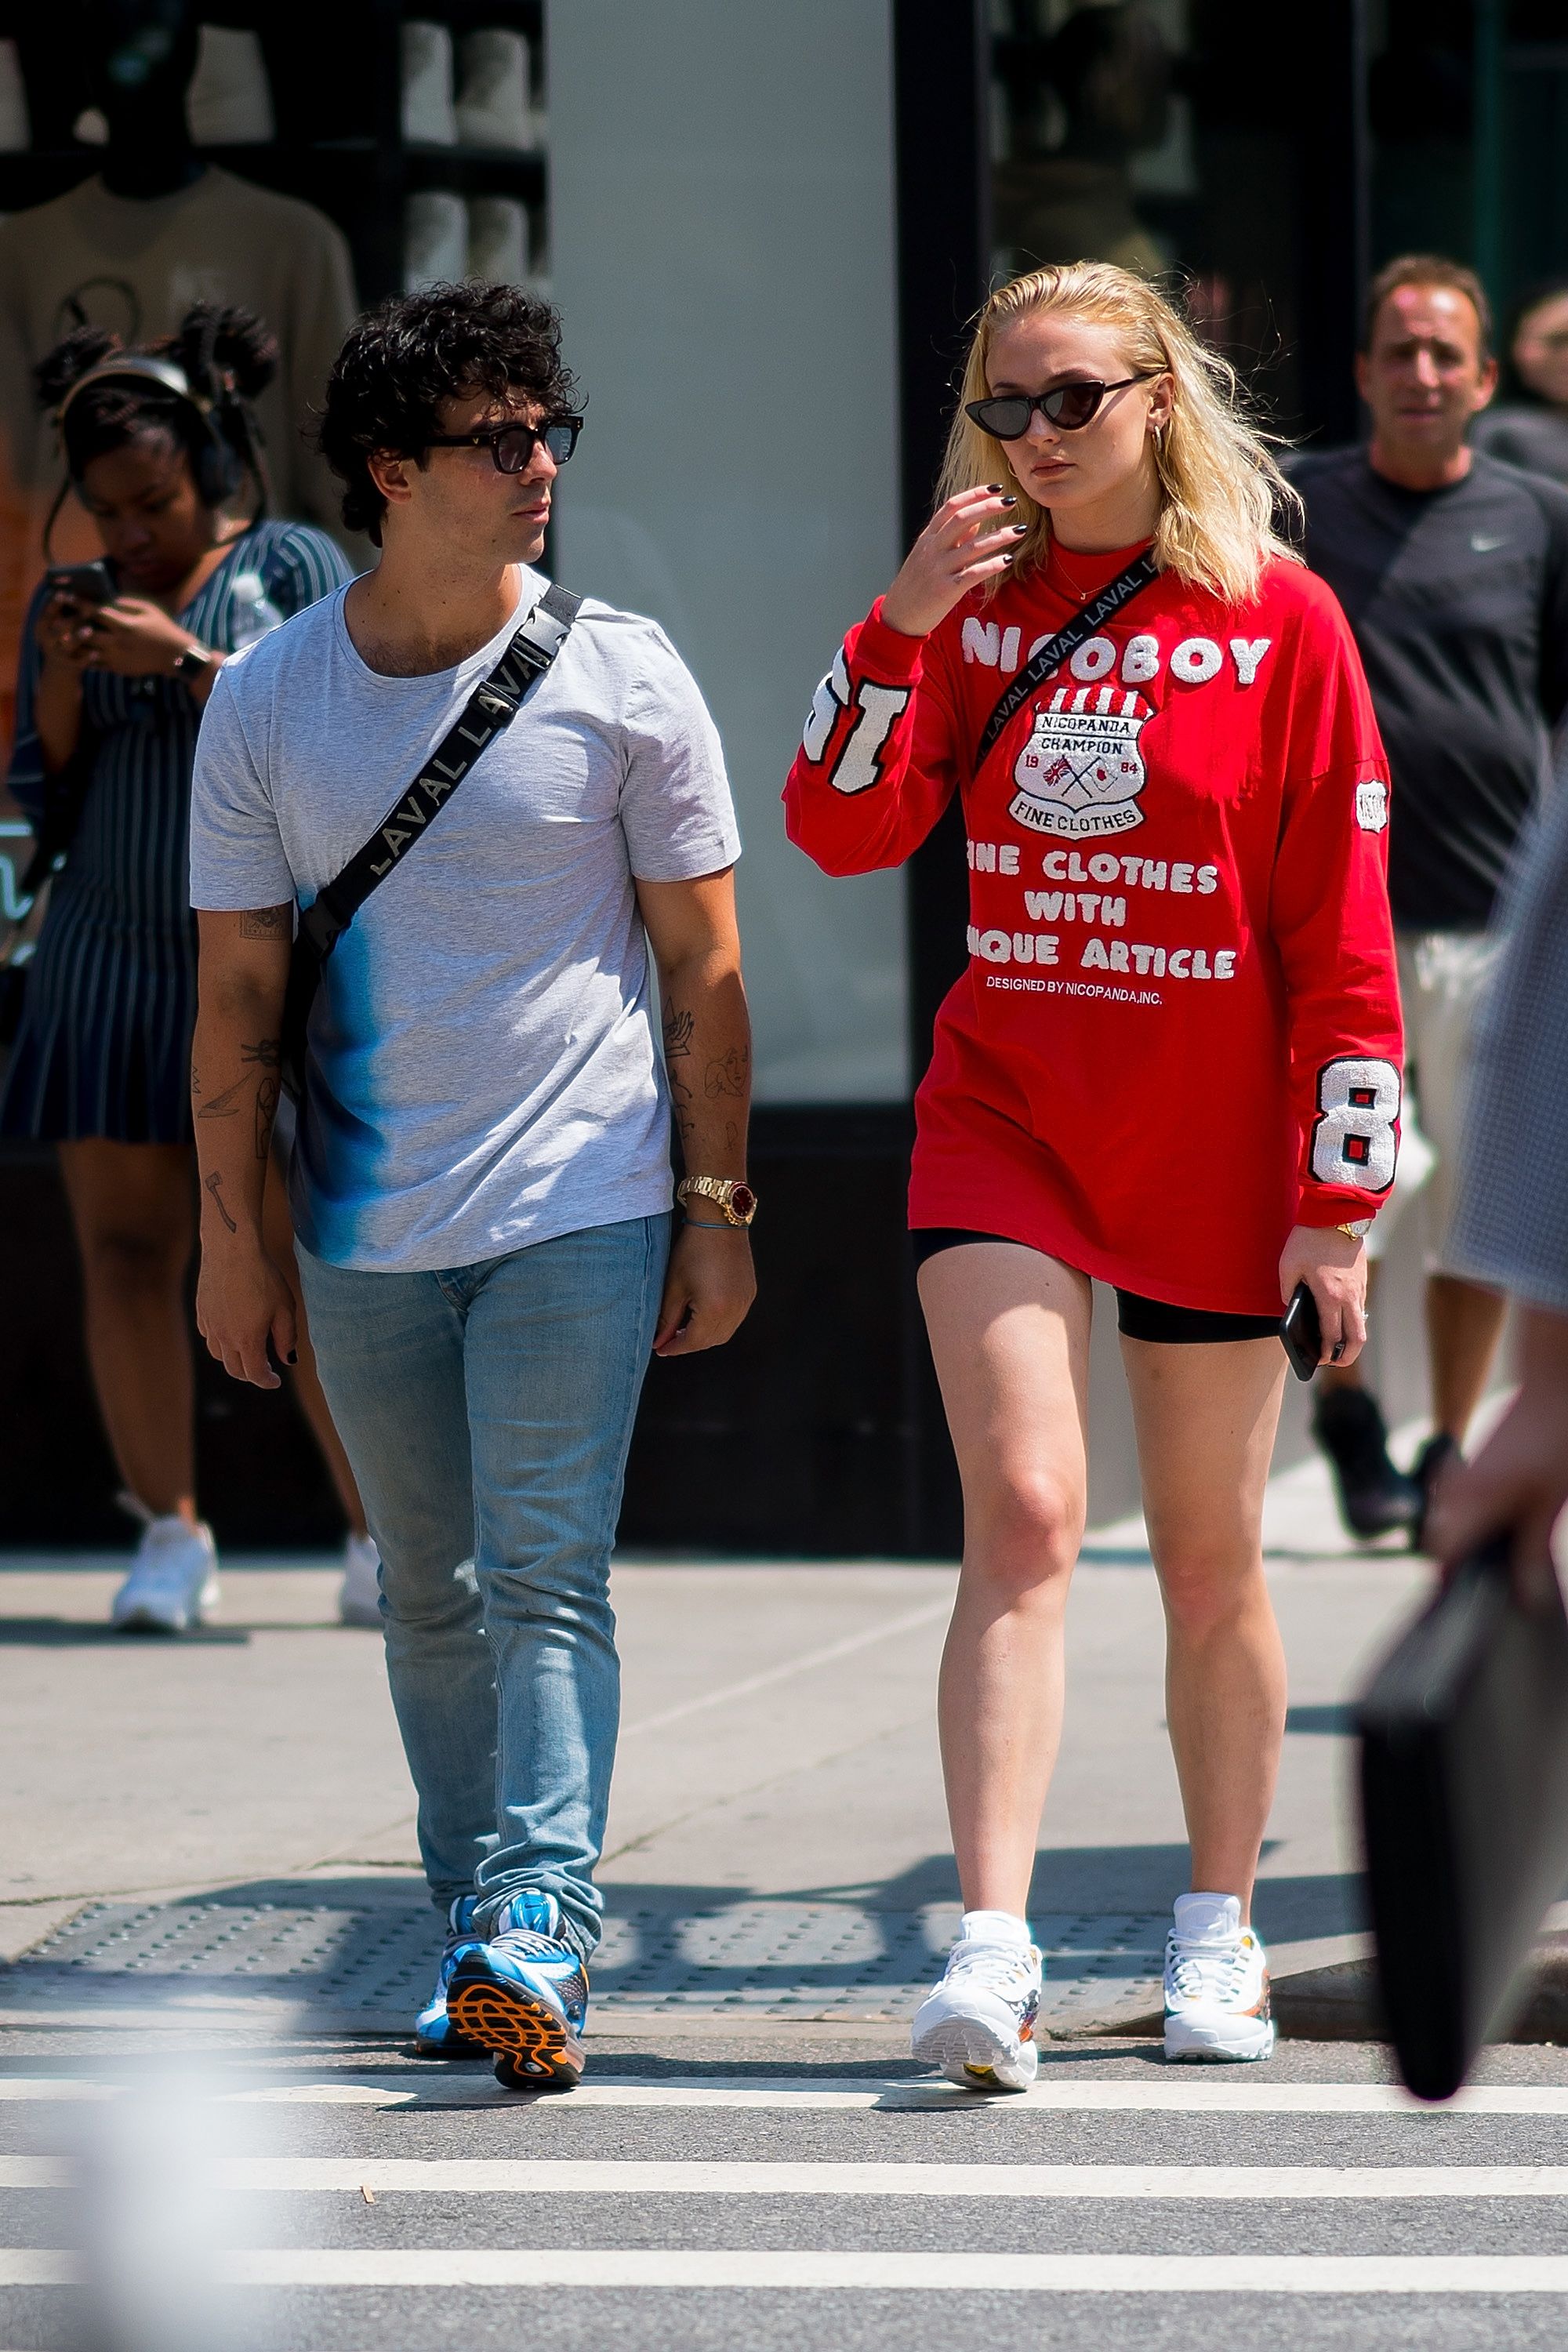 Why Was Sophie Turner Crying with Joe Jonas in New York?